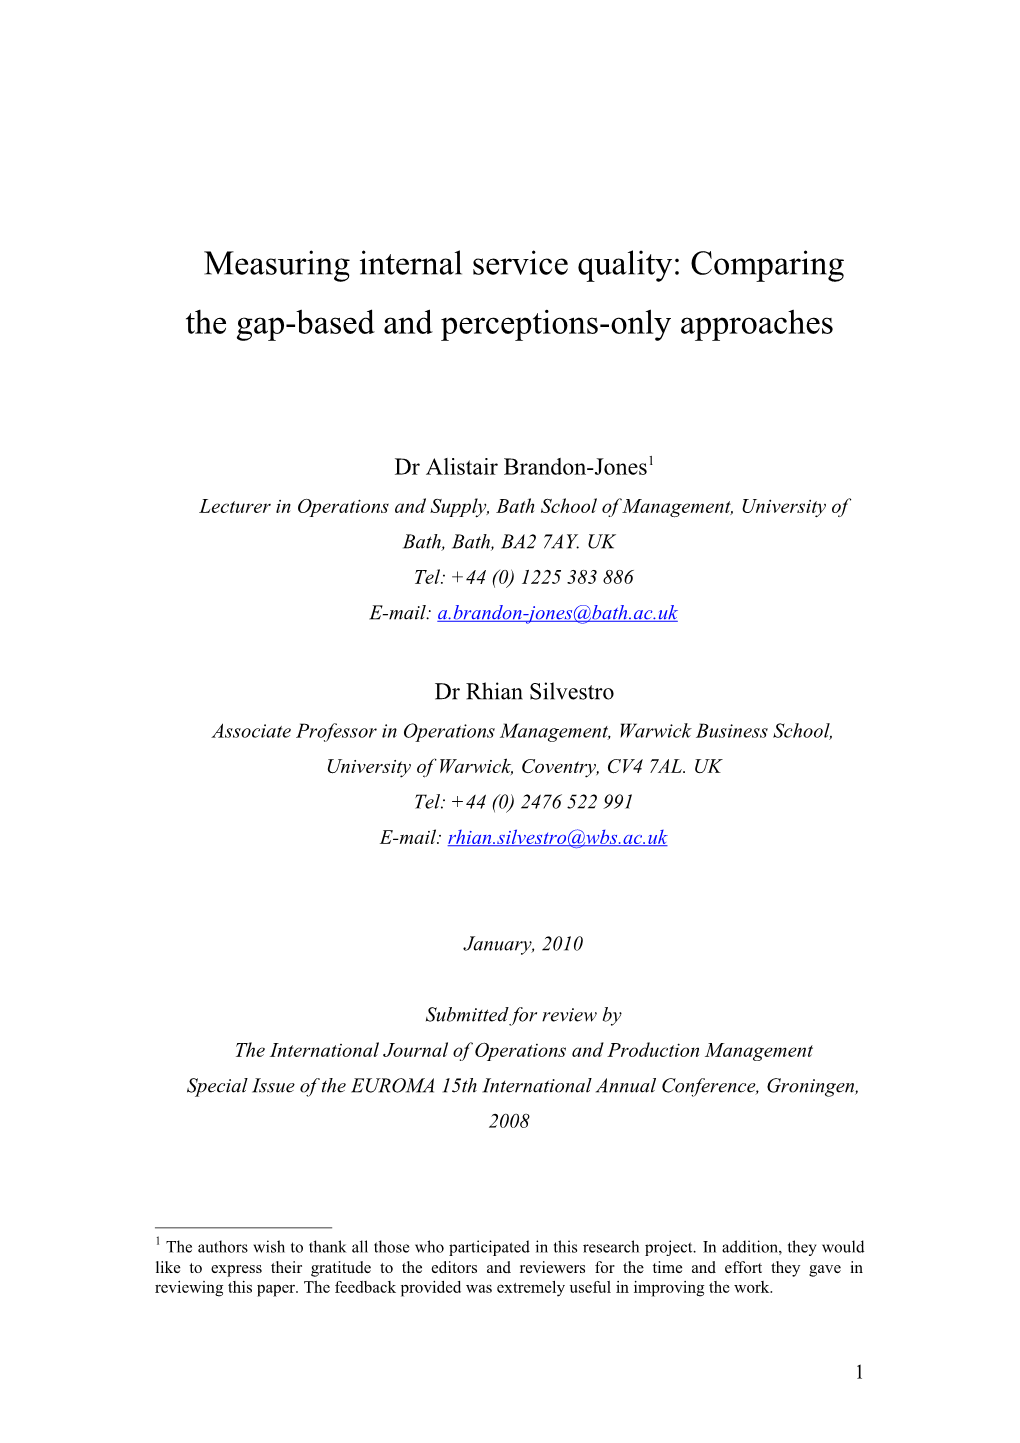 Measuring Internal Service Quality: Comparing the Gap-Based and Perceptions-Only Approaches